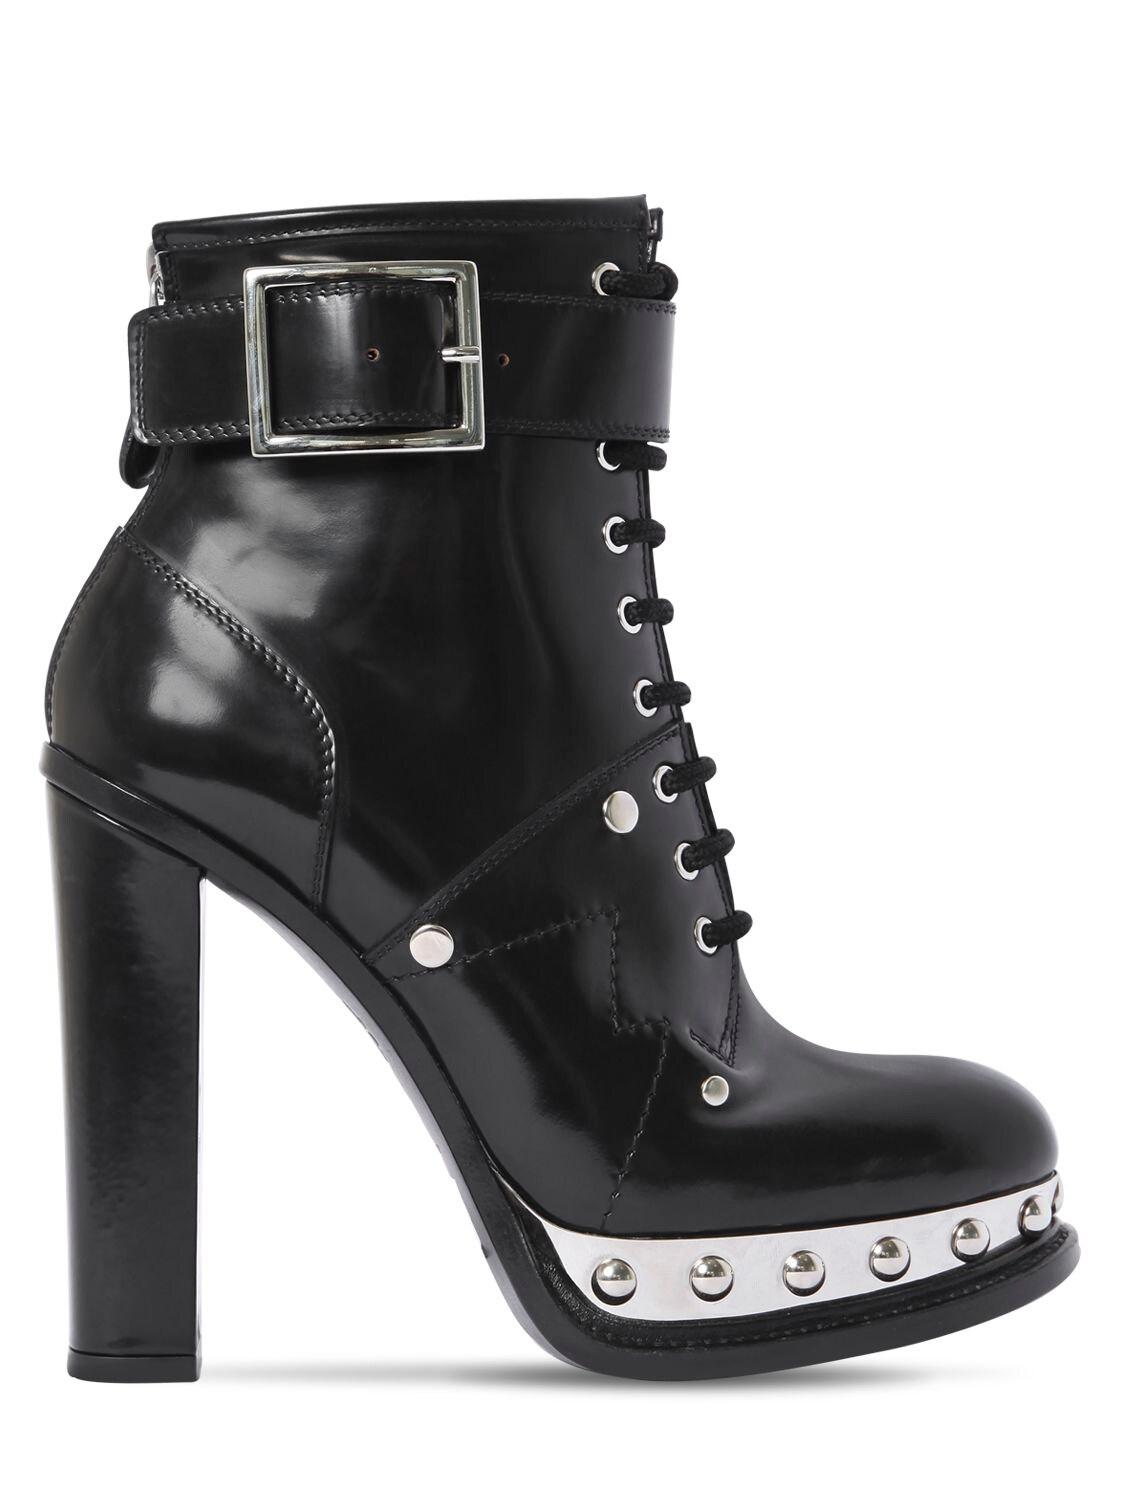 Alexander McQueen 125mm Studded Leather Ankle Boots in Black - Lyst